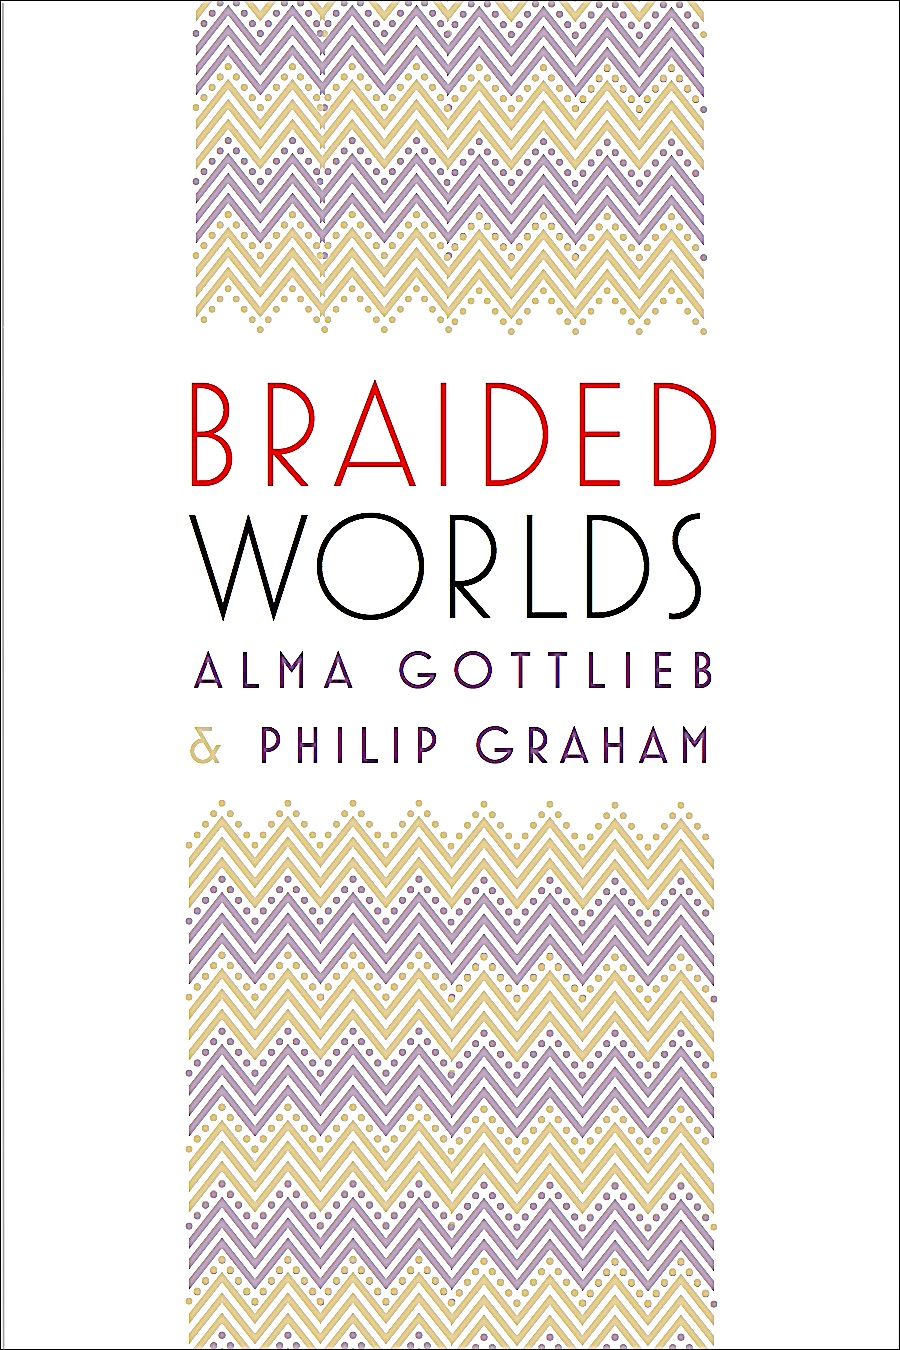 Braided Worlds book cover